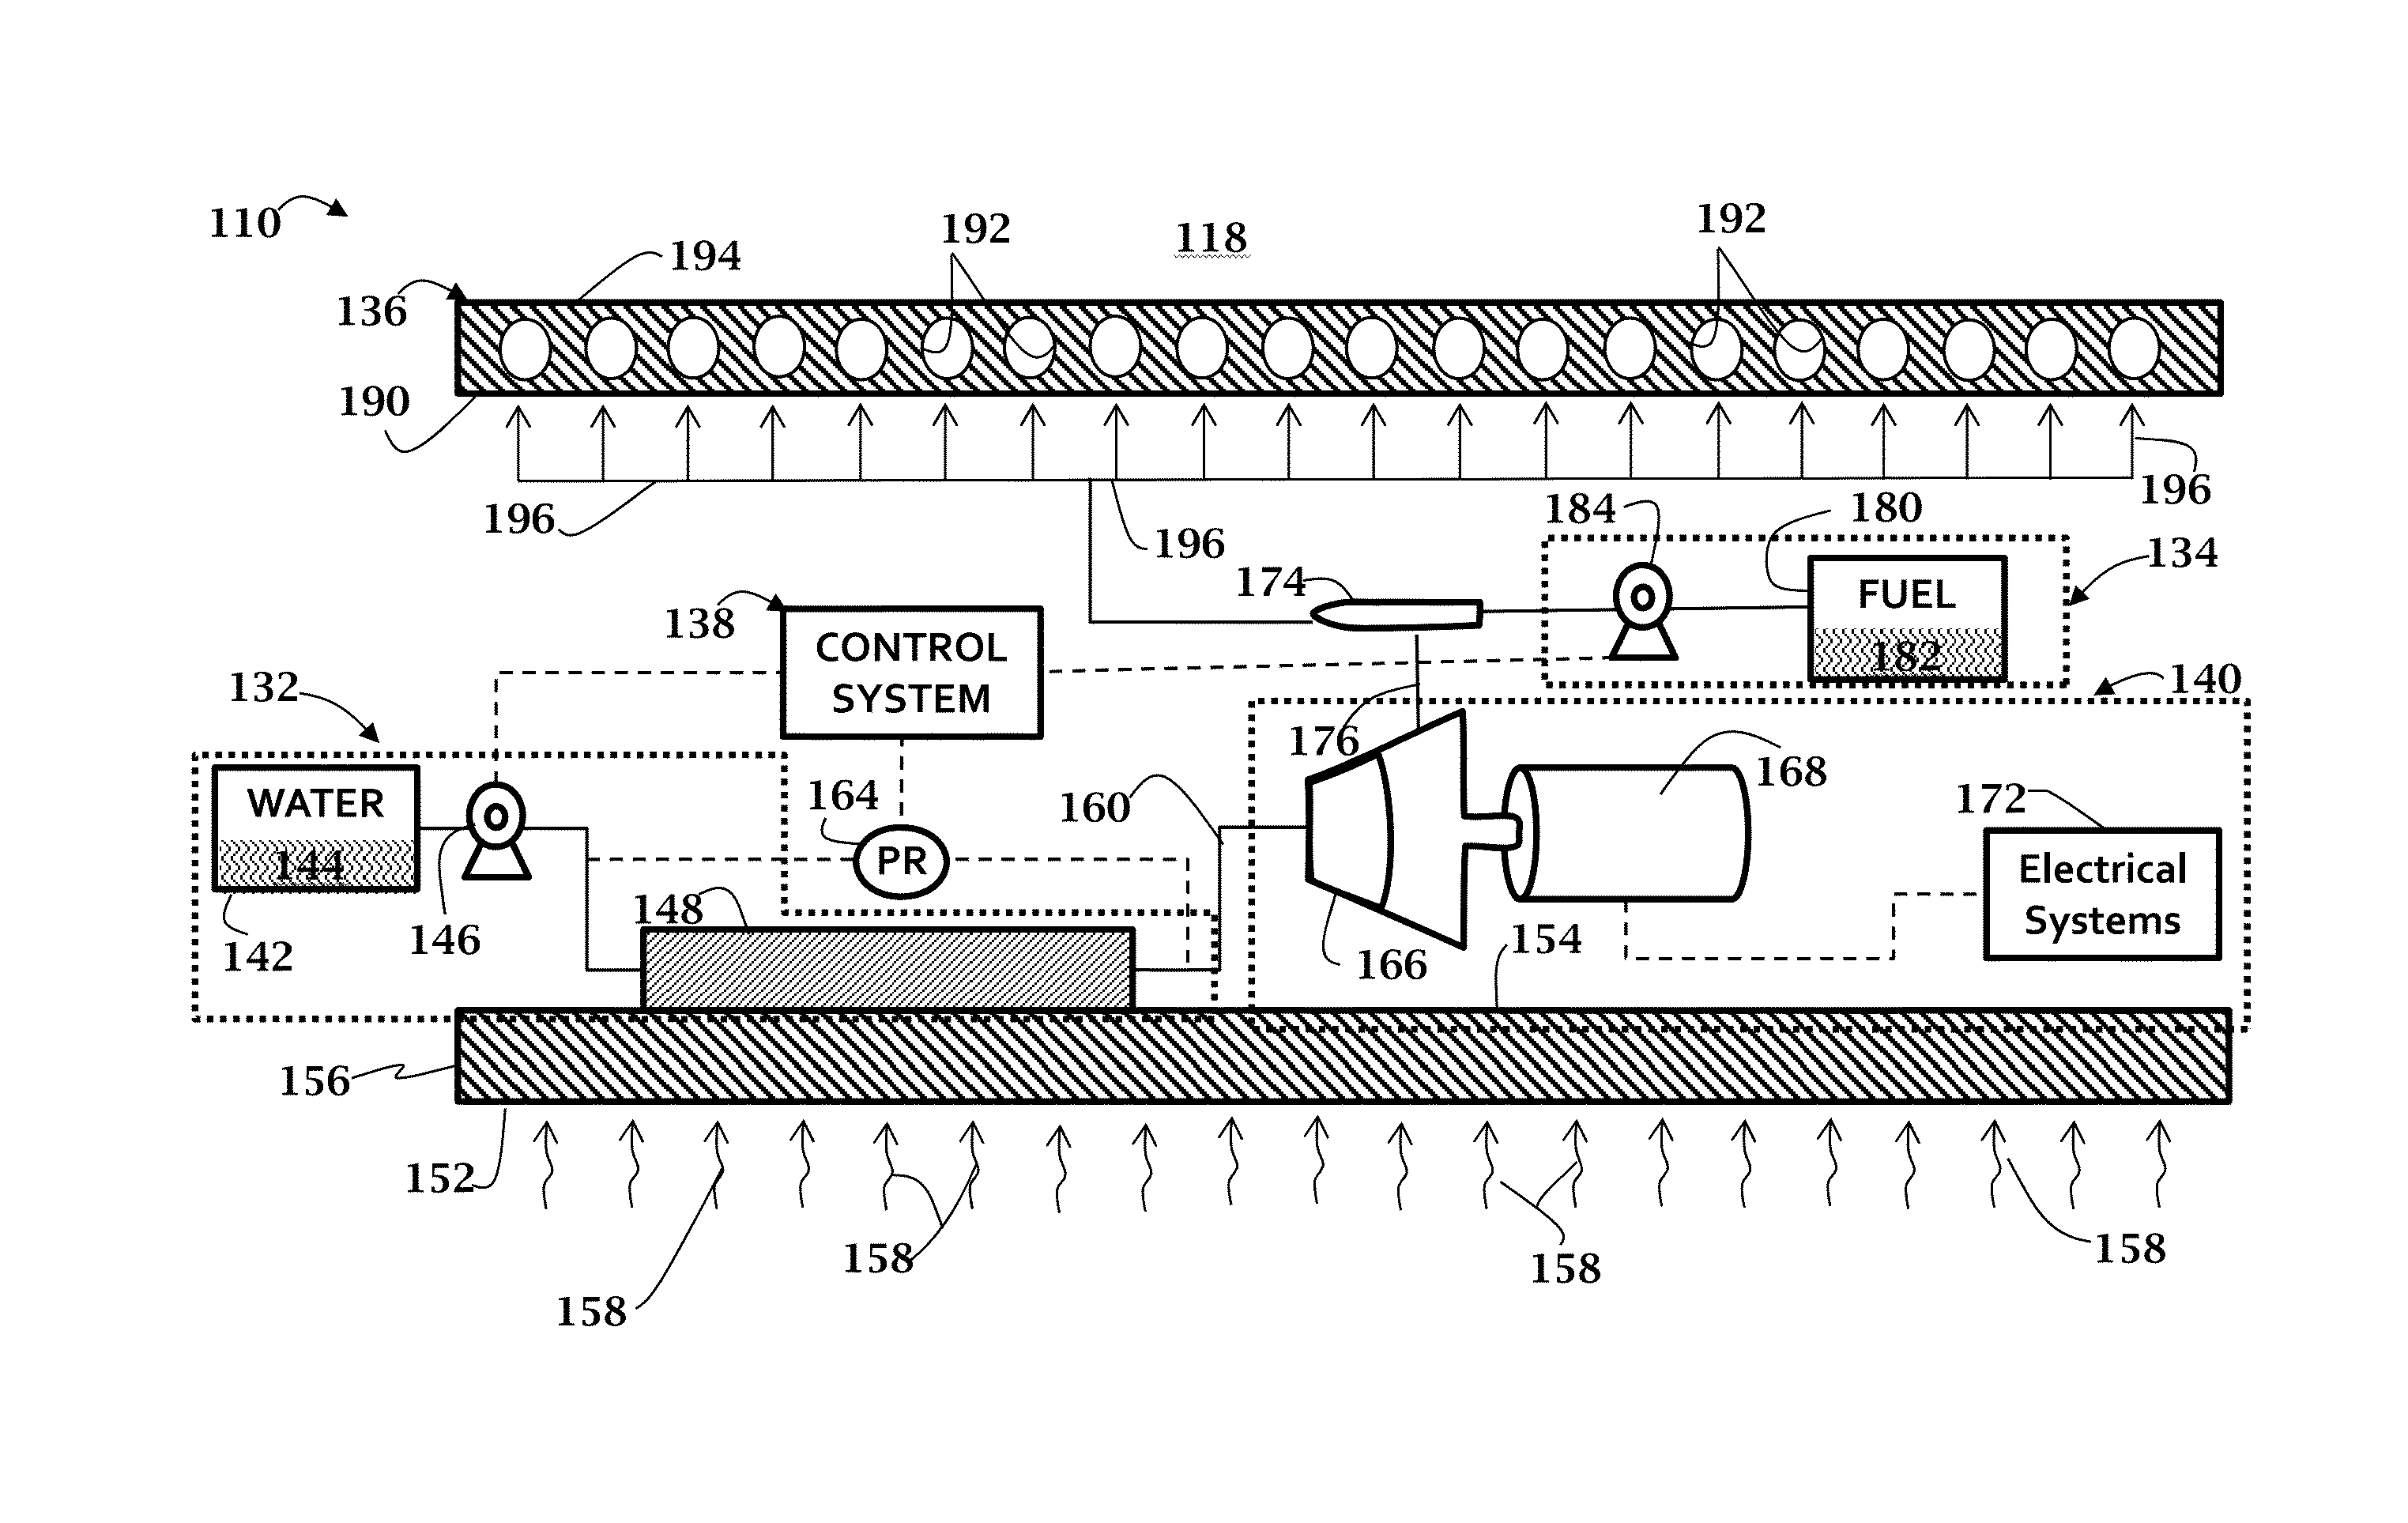 High-speed vehicle power and thermal management system and methods of use therefor